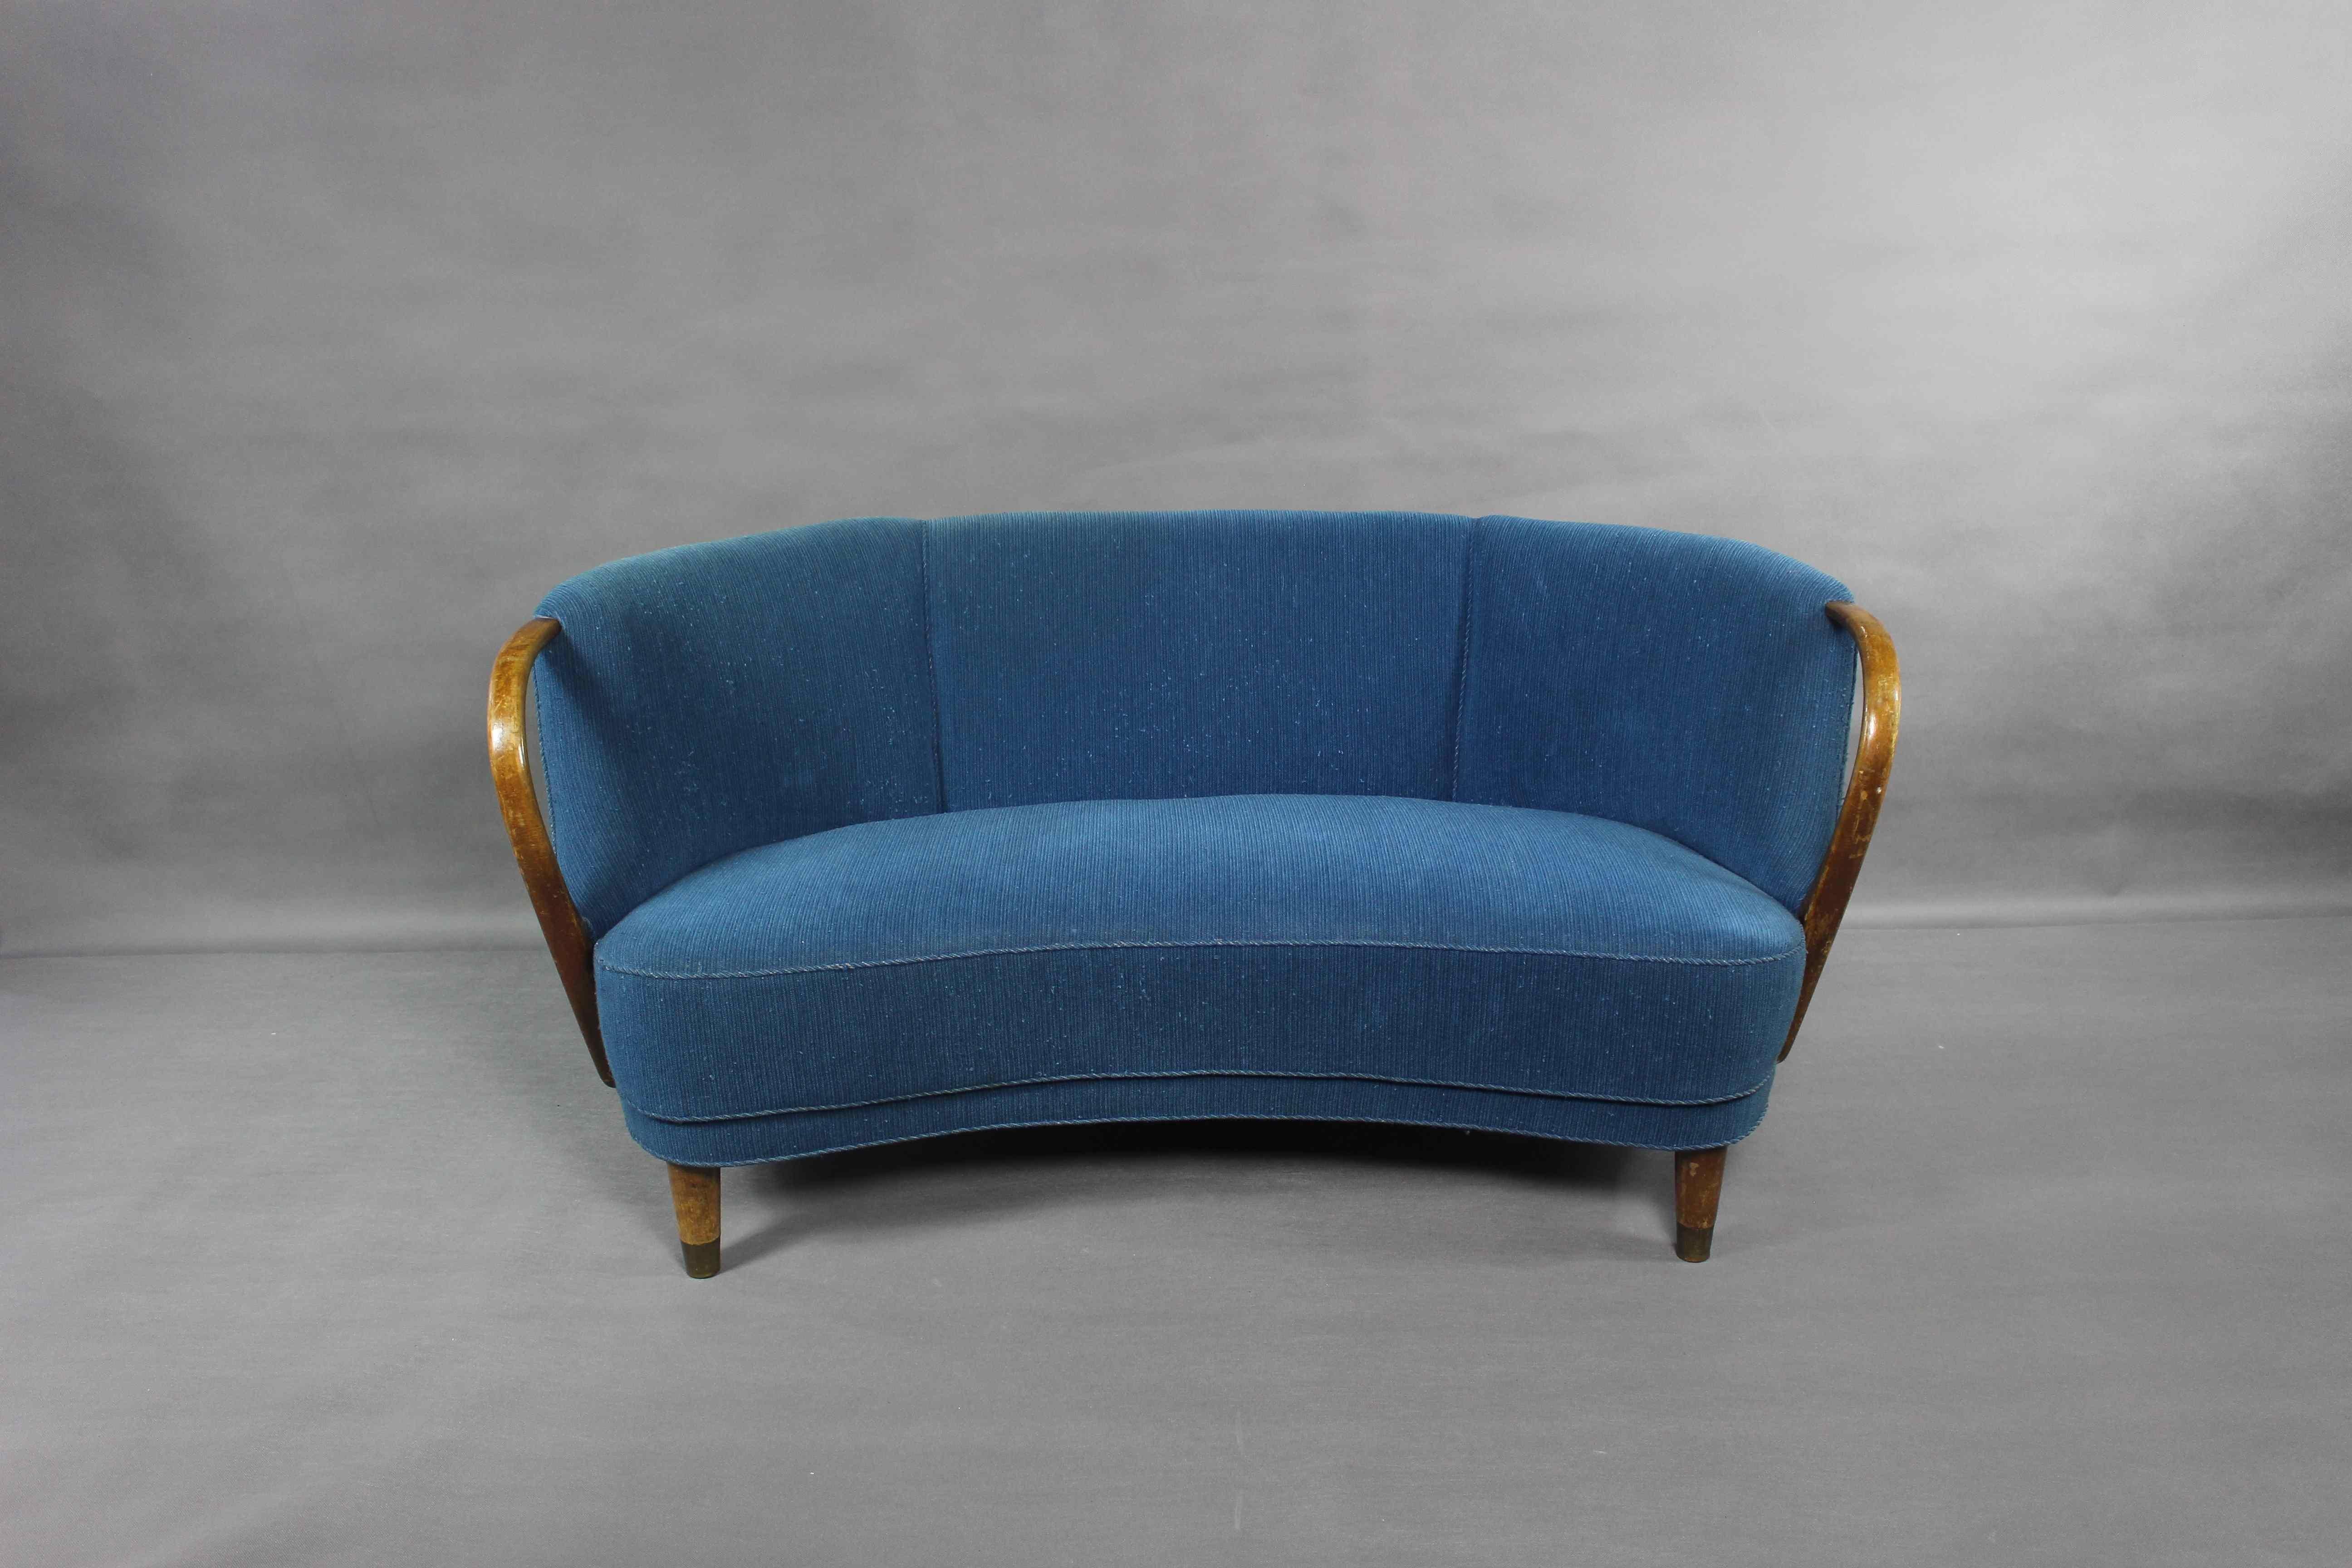 Unique curved or banana shaped loveseat or settee with open armrests designed and made as Model 96 by N.A. Jørgensens Møbelfabrik in 1954/55.

N.A. Jørgensen is better known under the name Bramin Mobler a name they adopted in the 1960s.

